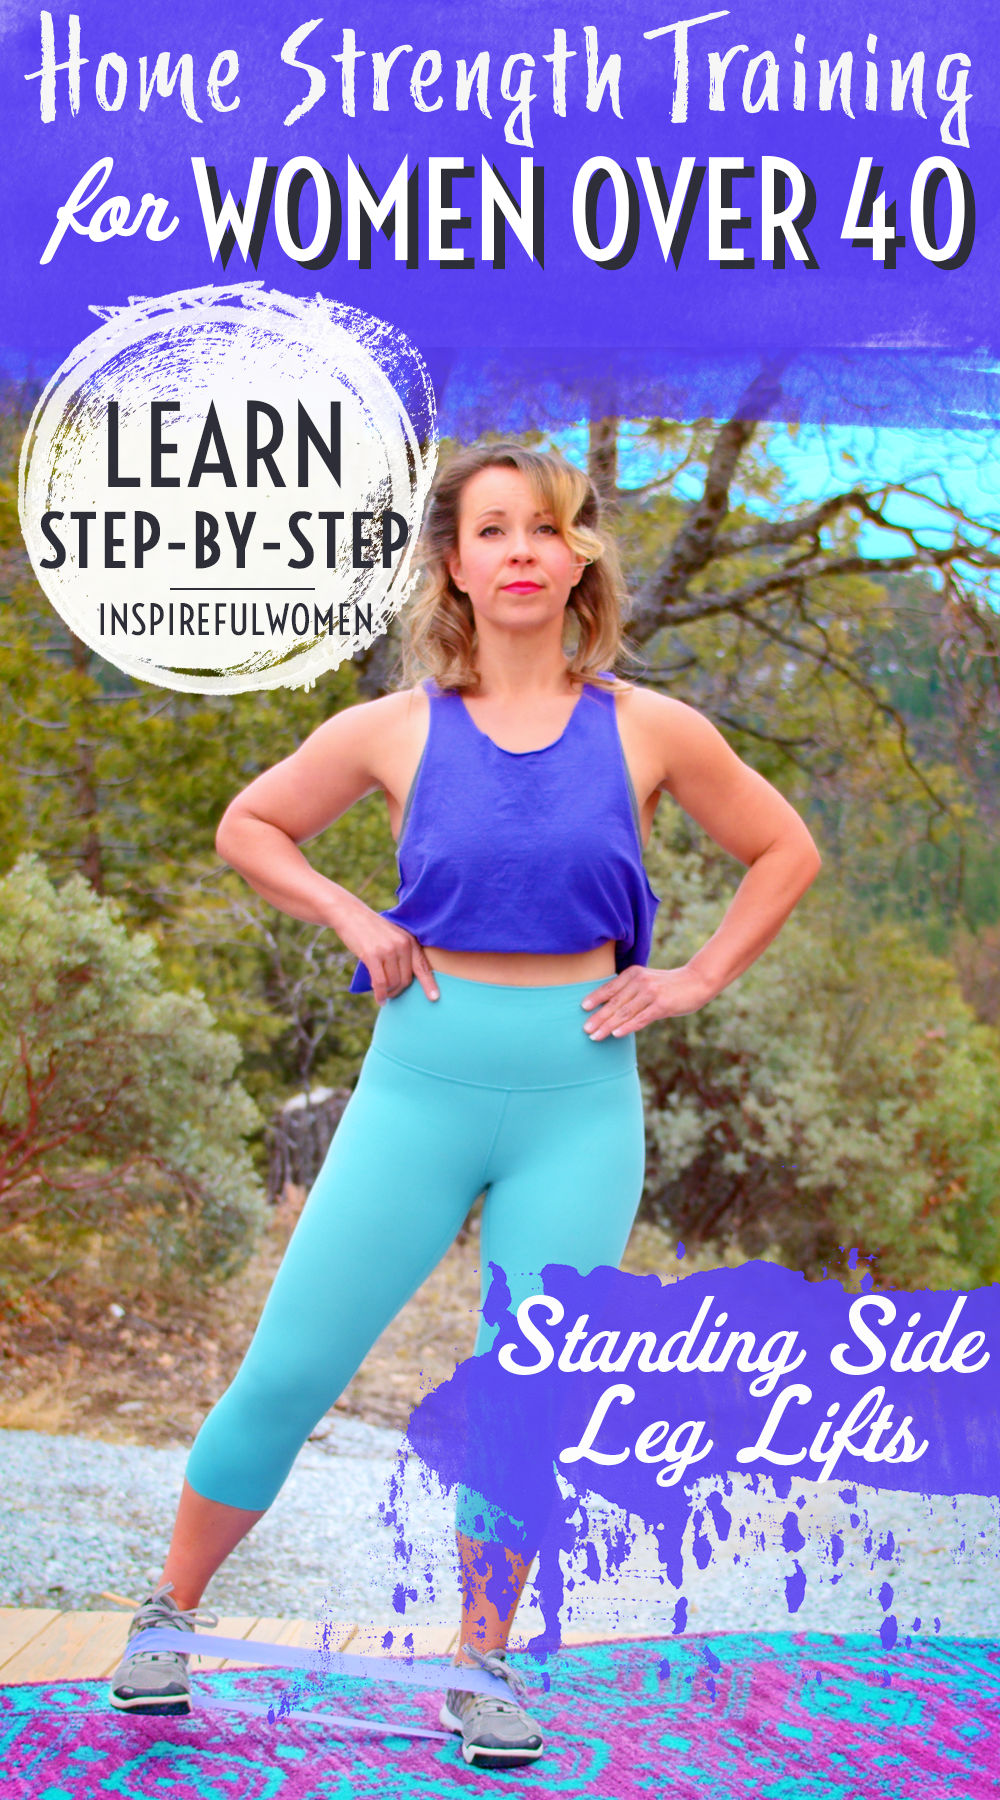 standing-side-leg-lifts-glutes-strength-training-at-home-women-over-40